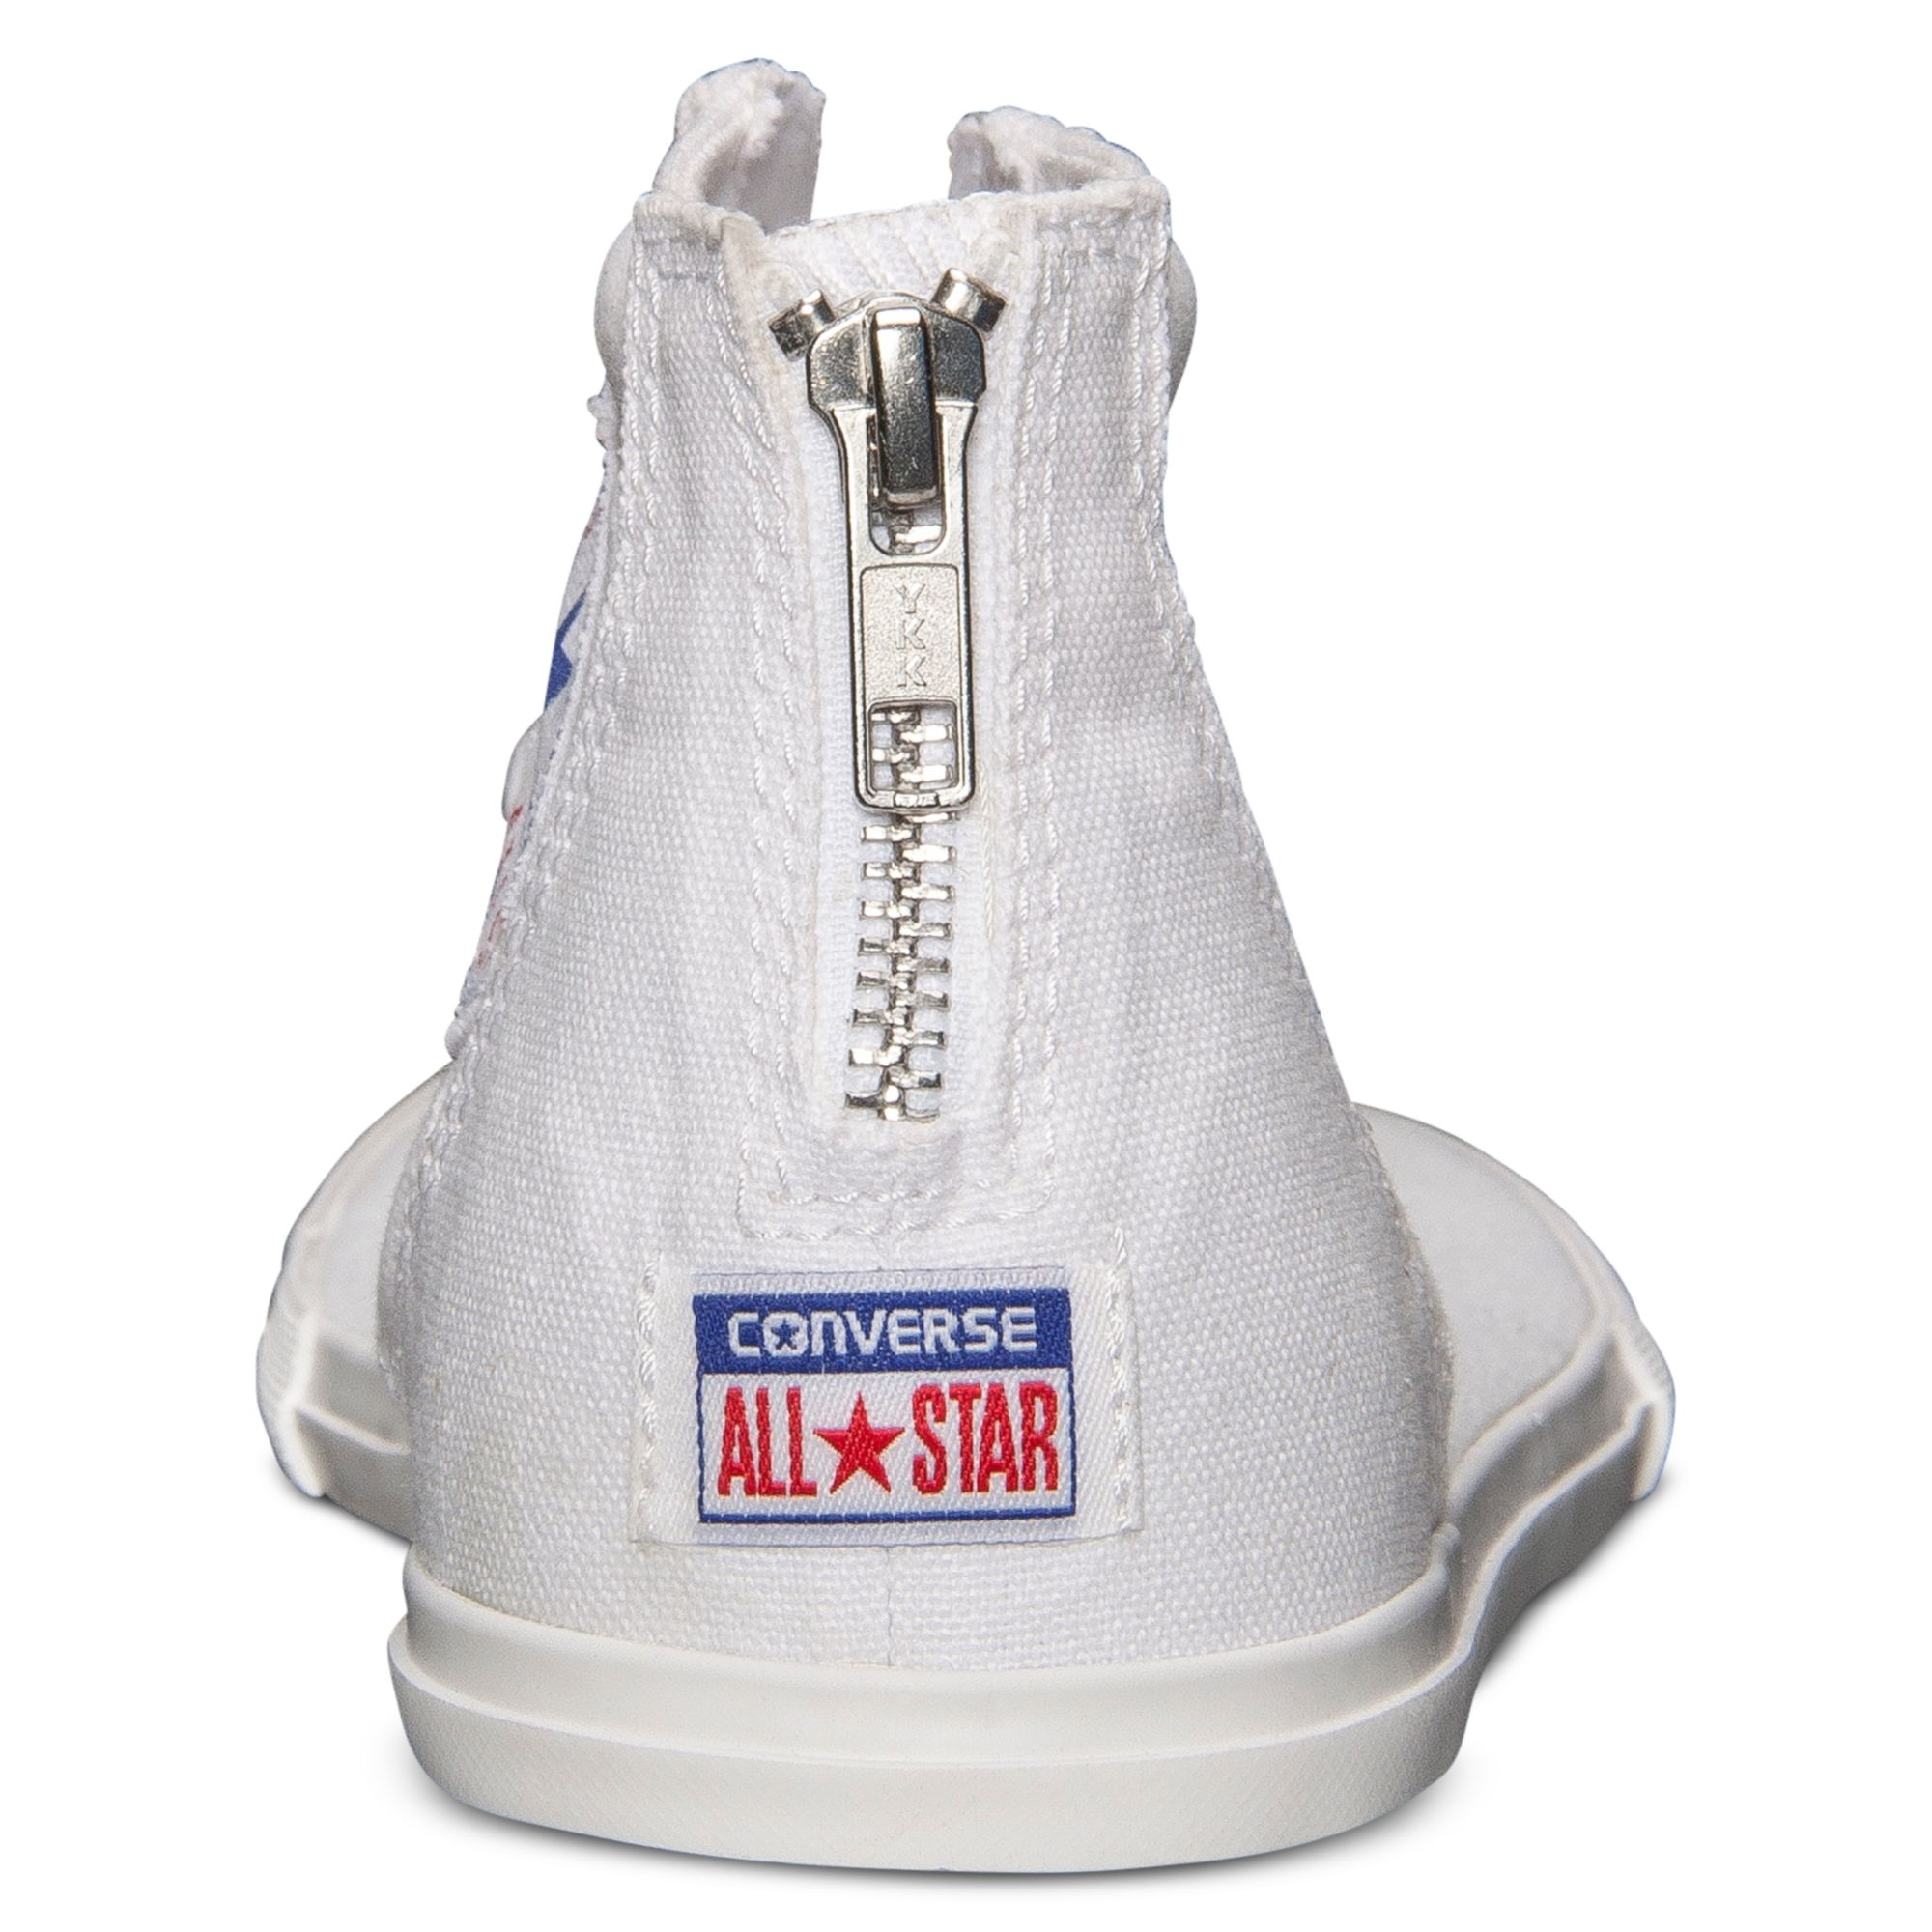 Converse Women's Chuck Taylor Gladiator Thong Sandals From Finish Line in  White | Lyst